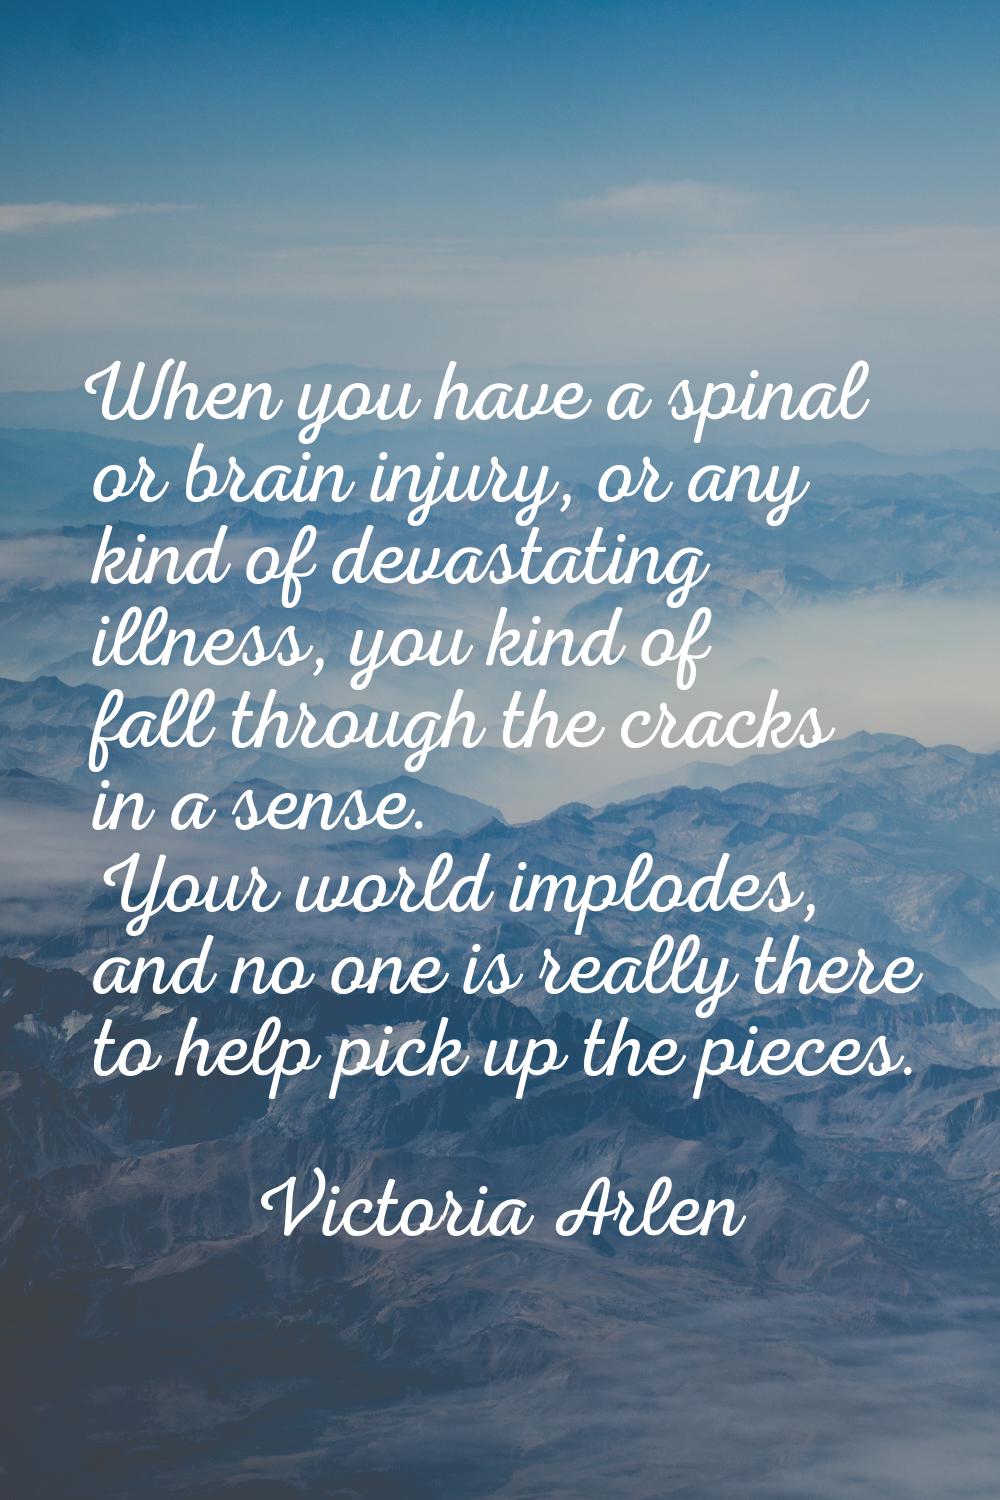 When you have a spinal or brain injury, or any kind of devastating illness, you kind of fall throug